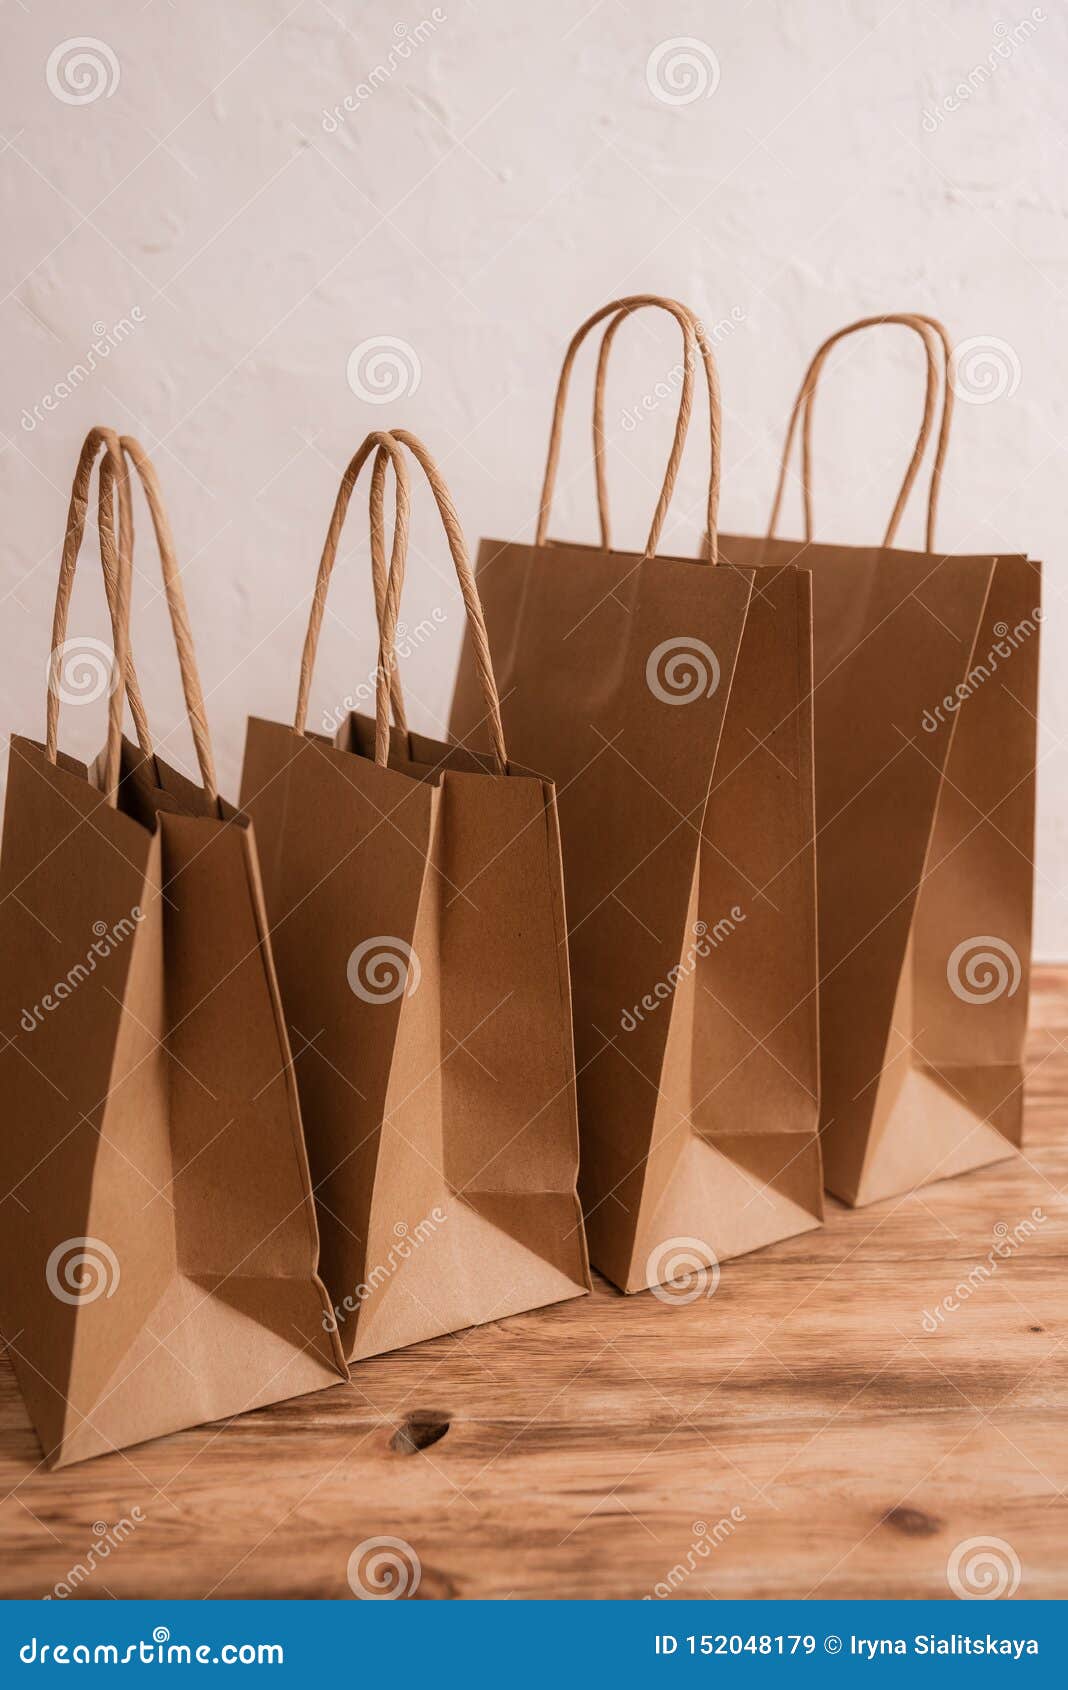 Download Mock-up Of Brown Craft Paper Package With Handles, Empty Shopping Bag With Area For Your Logo Or ...